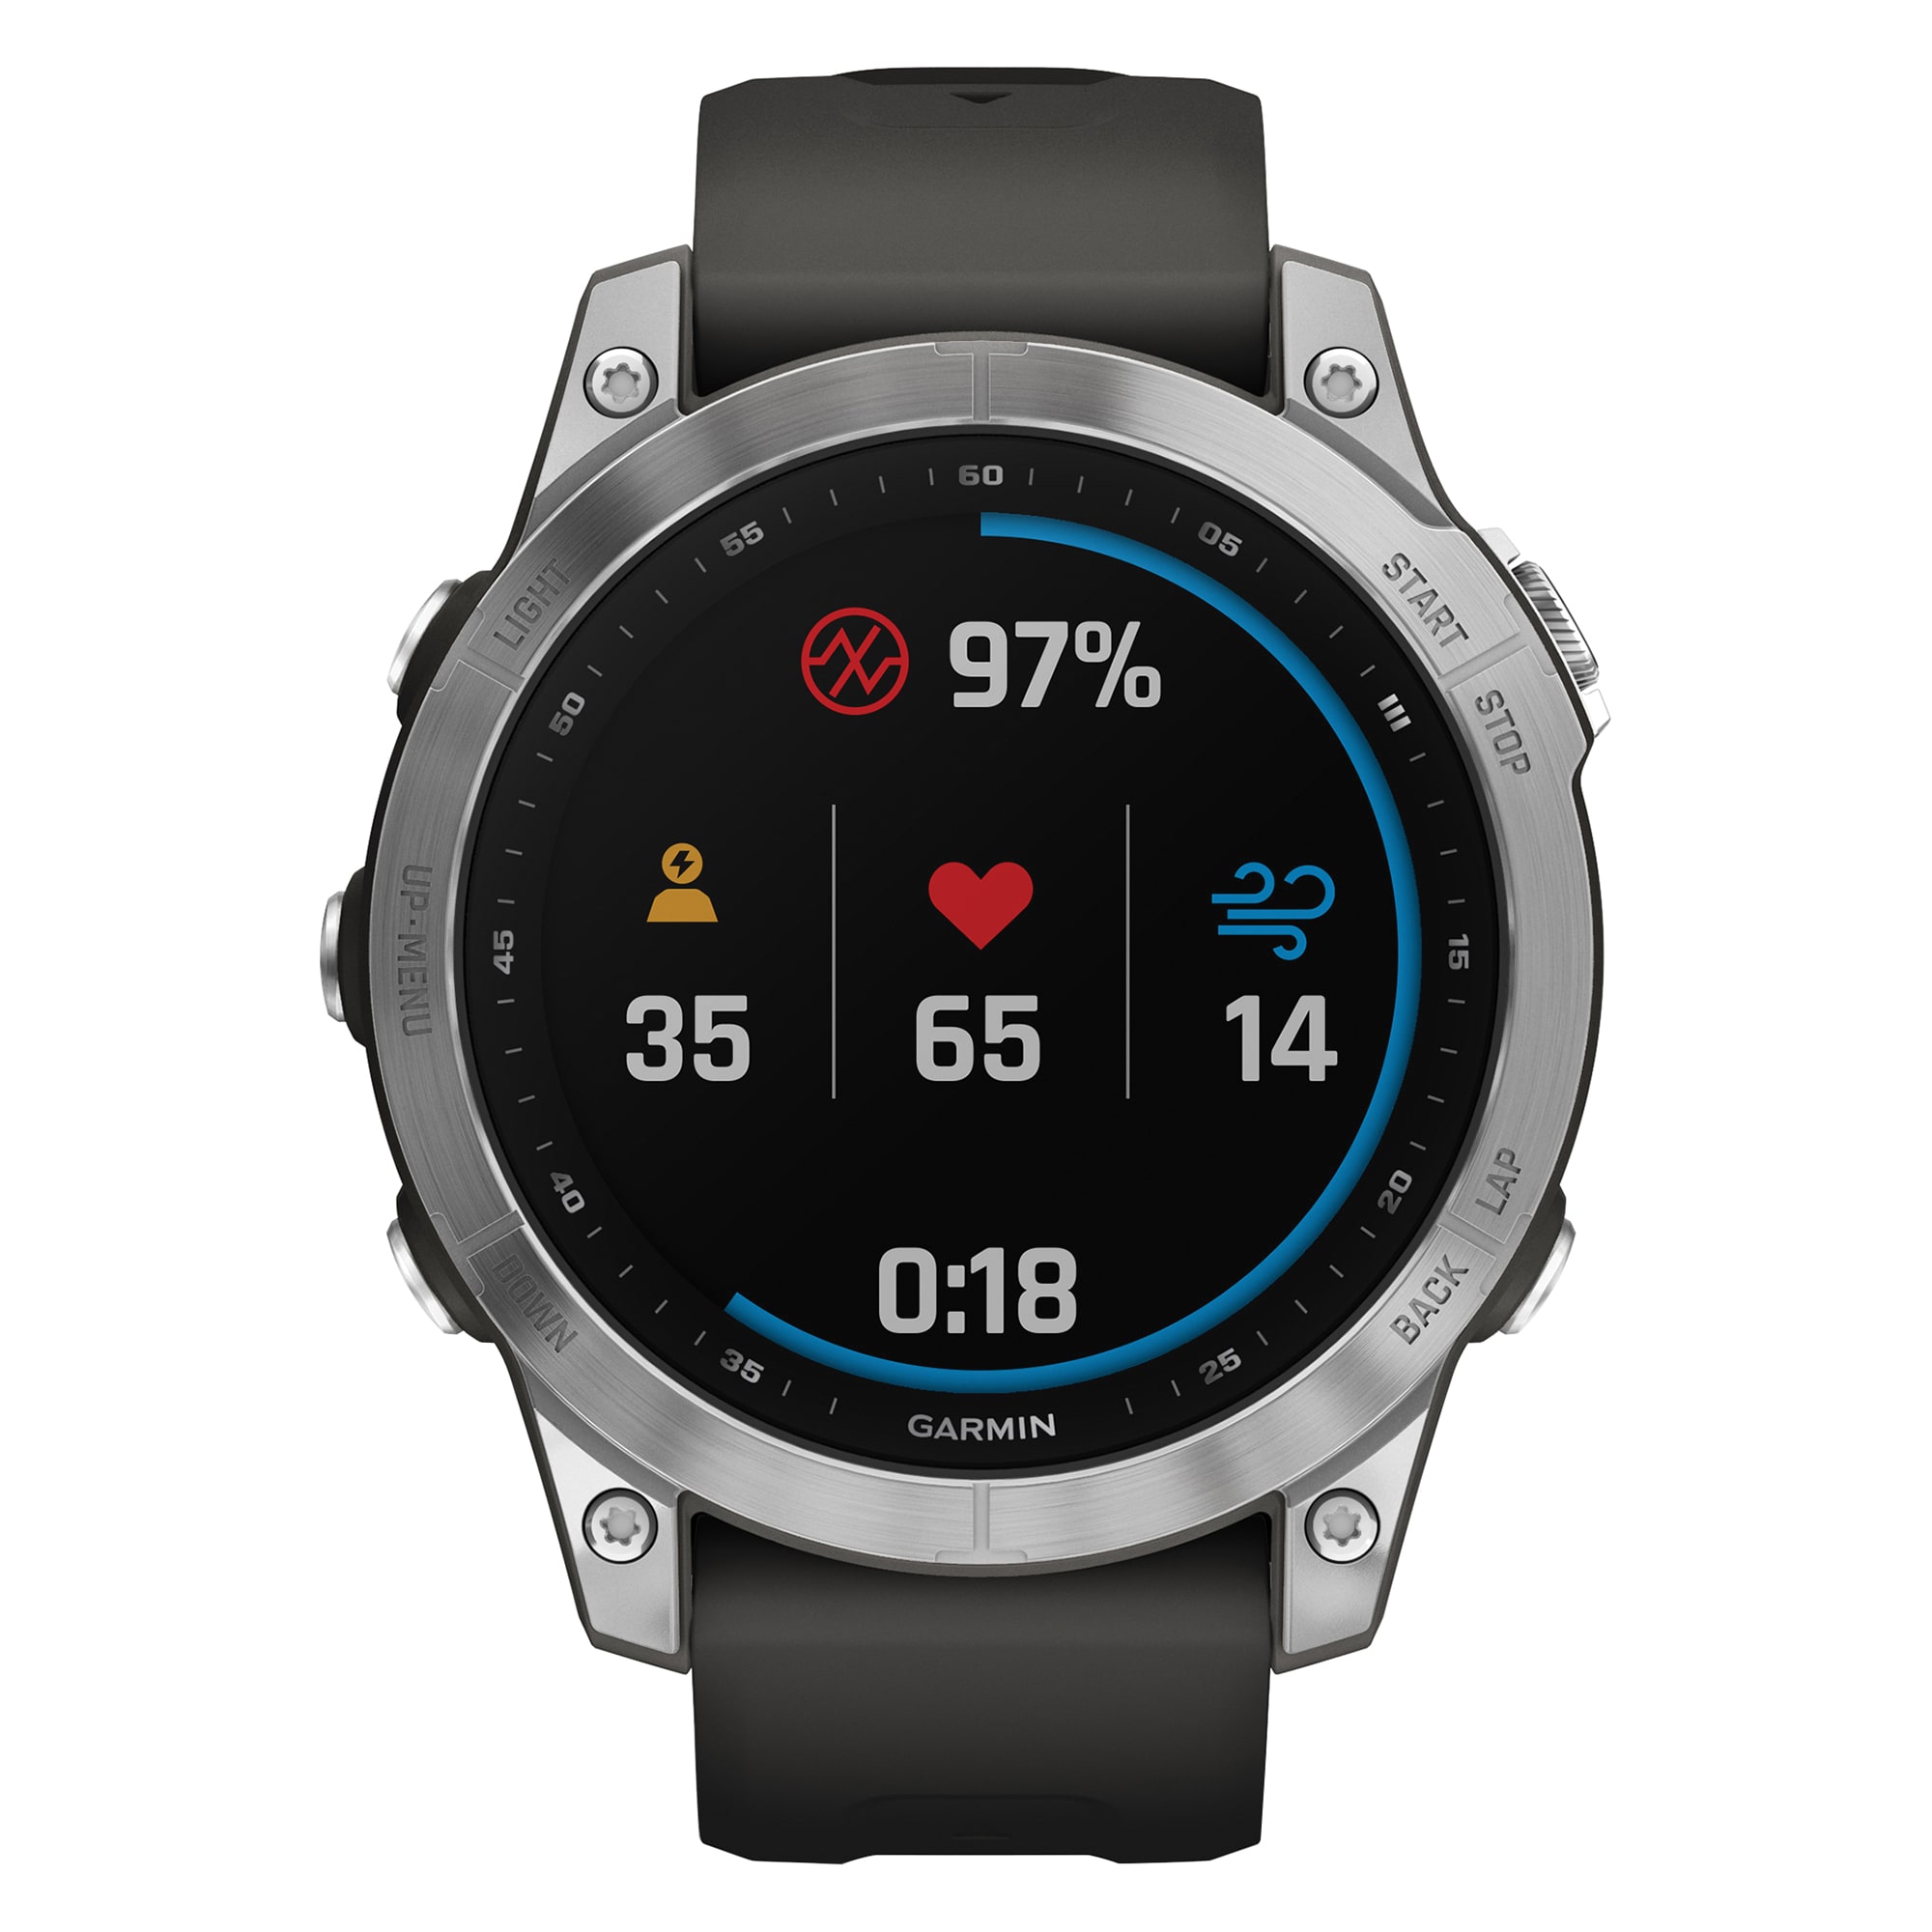 Trackers with Watch 7 Counter, in Smart Gps fenix the at Monitor and department Step Garmin Heart Rate Fitness Enabled